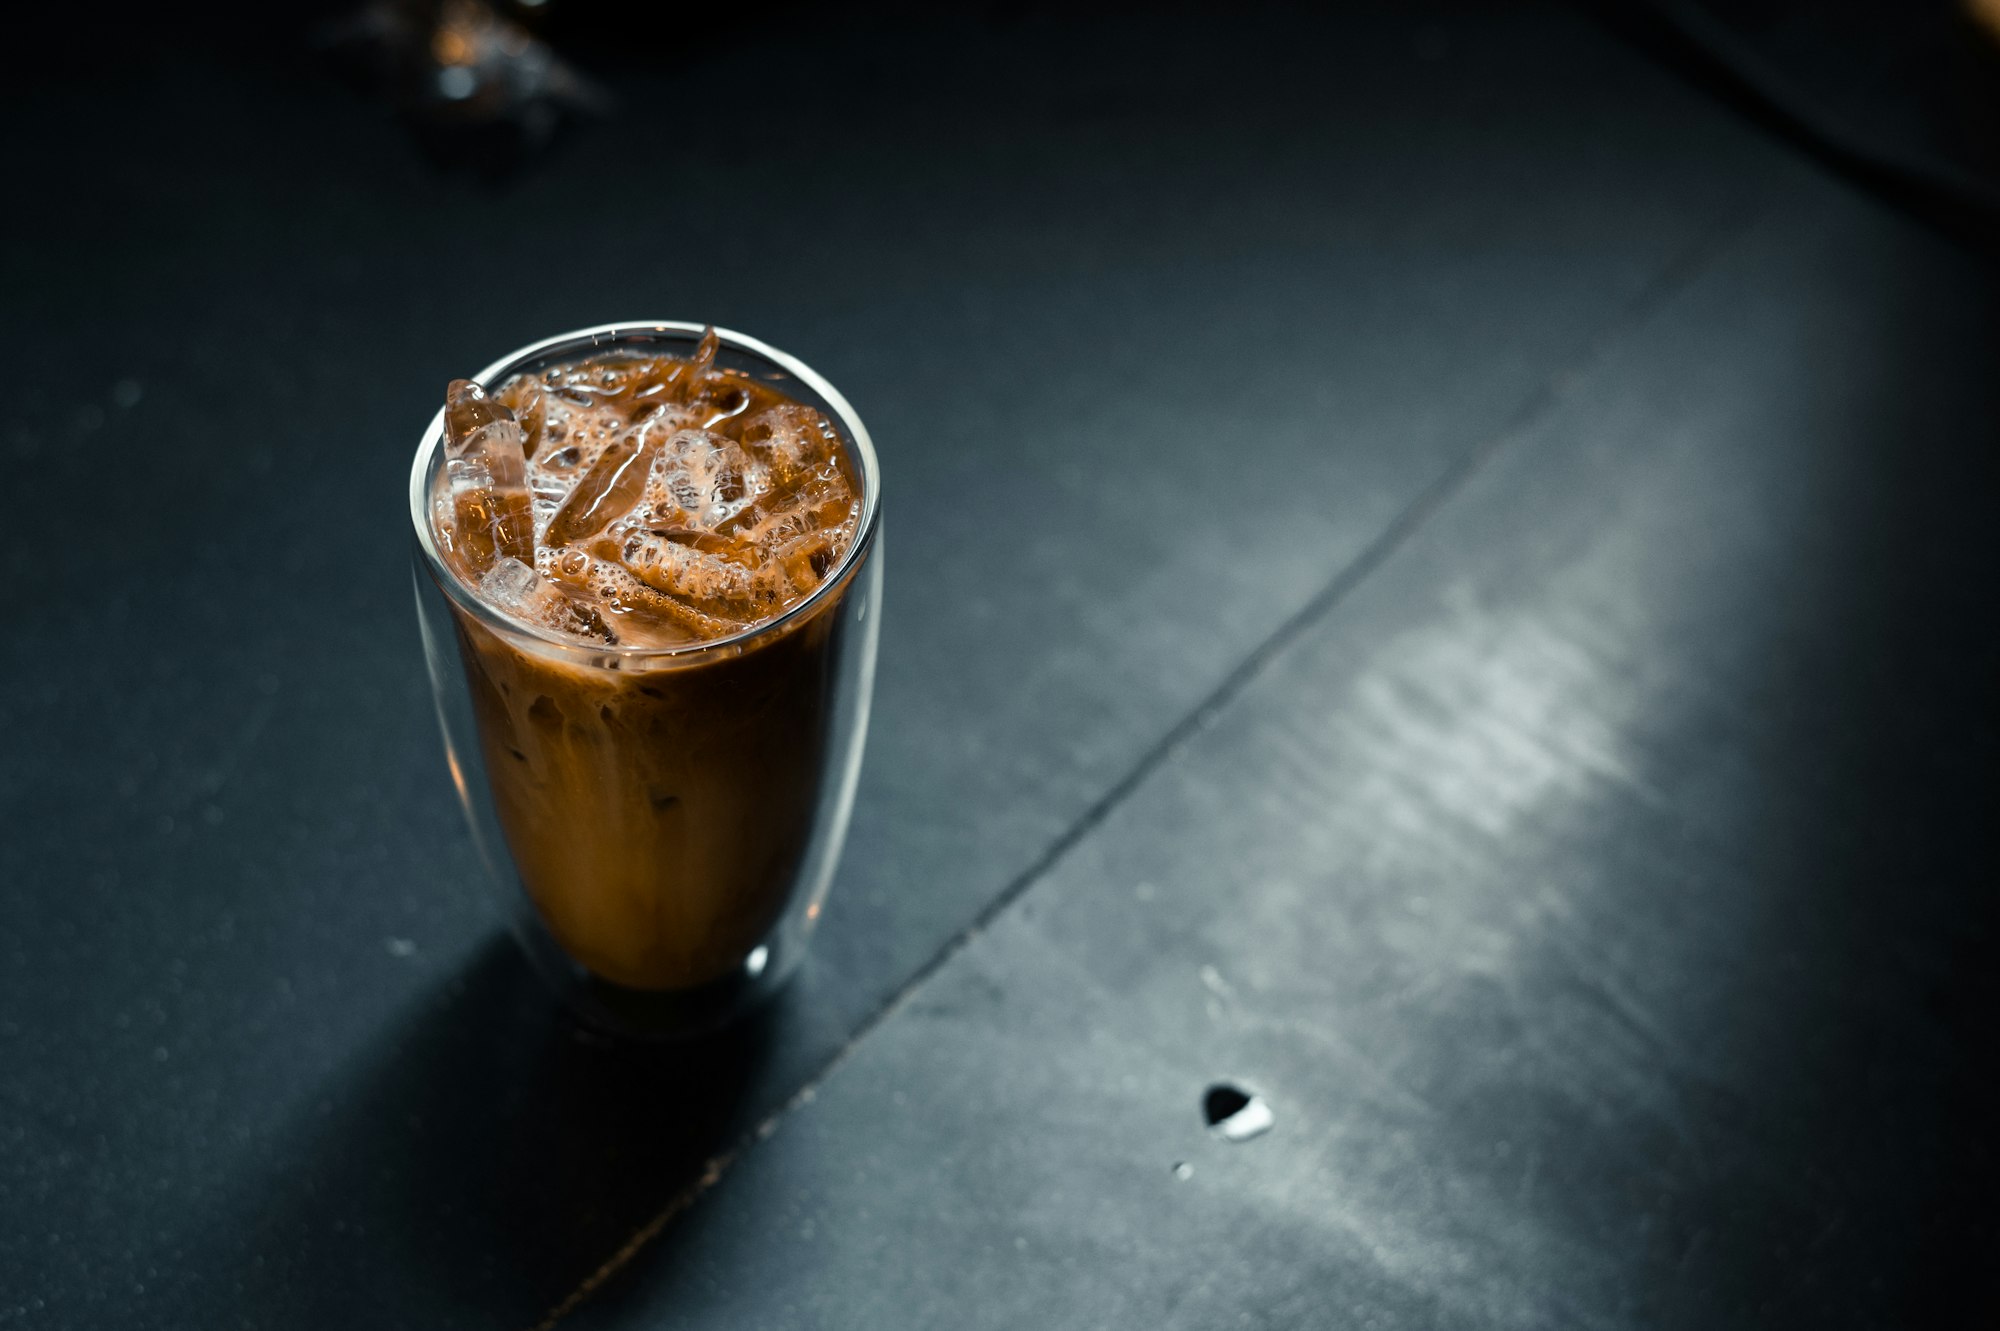 You Fancy Huh? Whip Up Your Own Starbucks-Style Iced Brown Sugar Oatmilk Shaken Espresso at Home